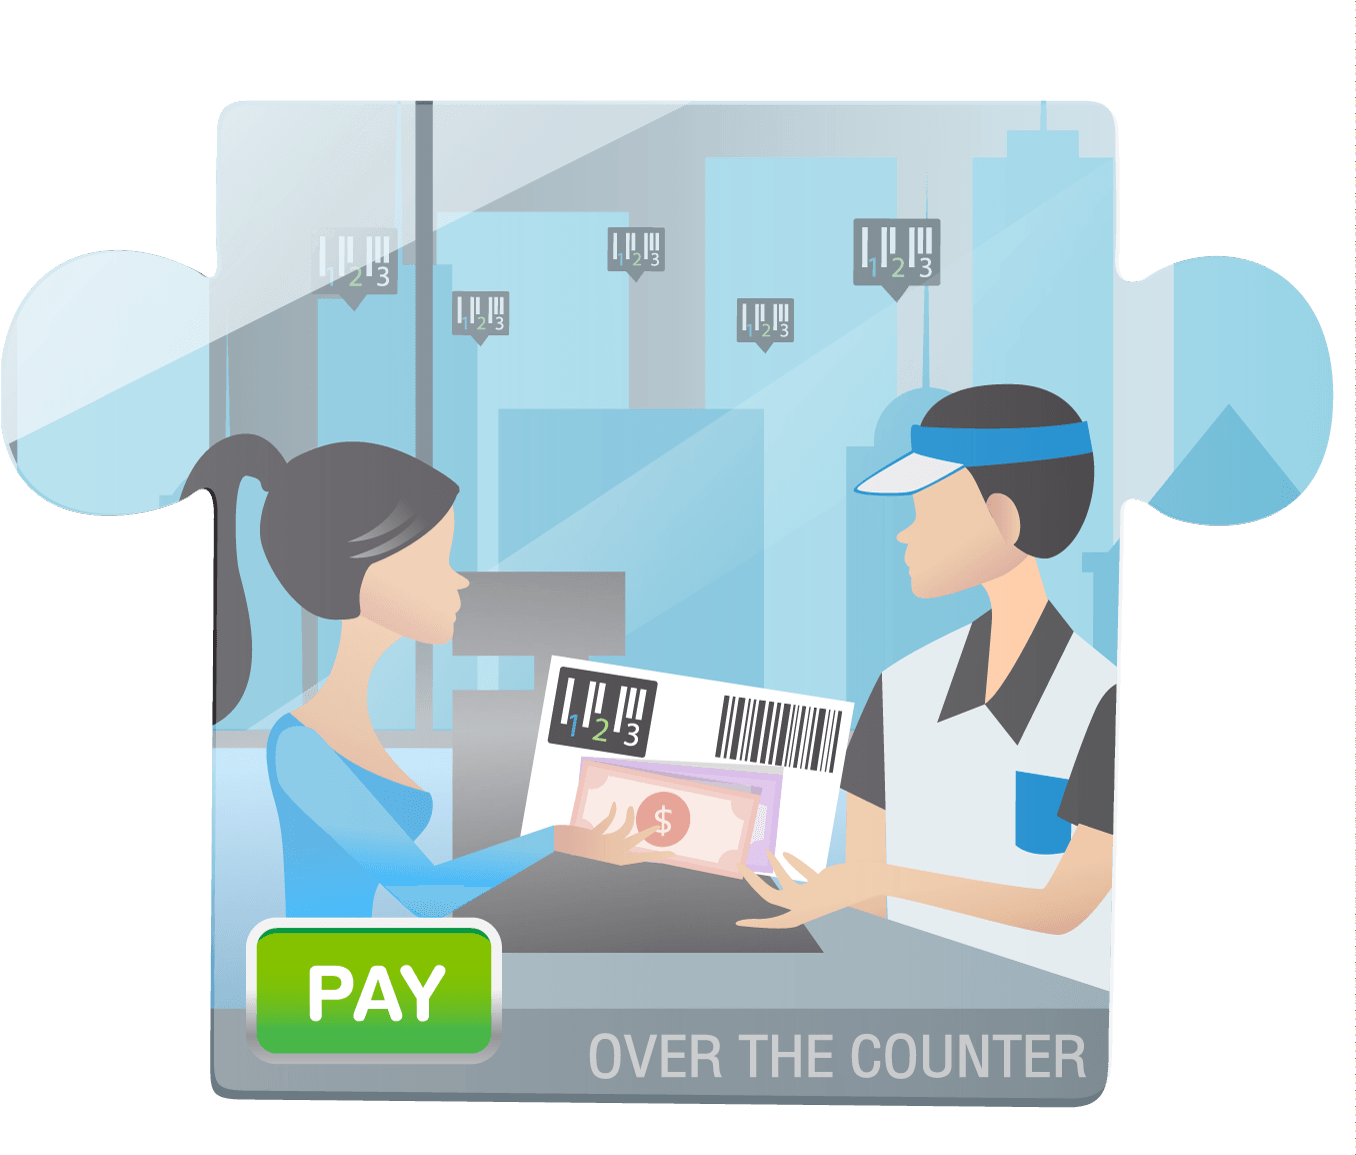 Over-the-Counter Market картинки. Money Counter арт PNG. Payment Counter PNG. At the Counter.